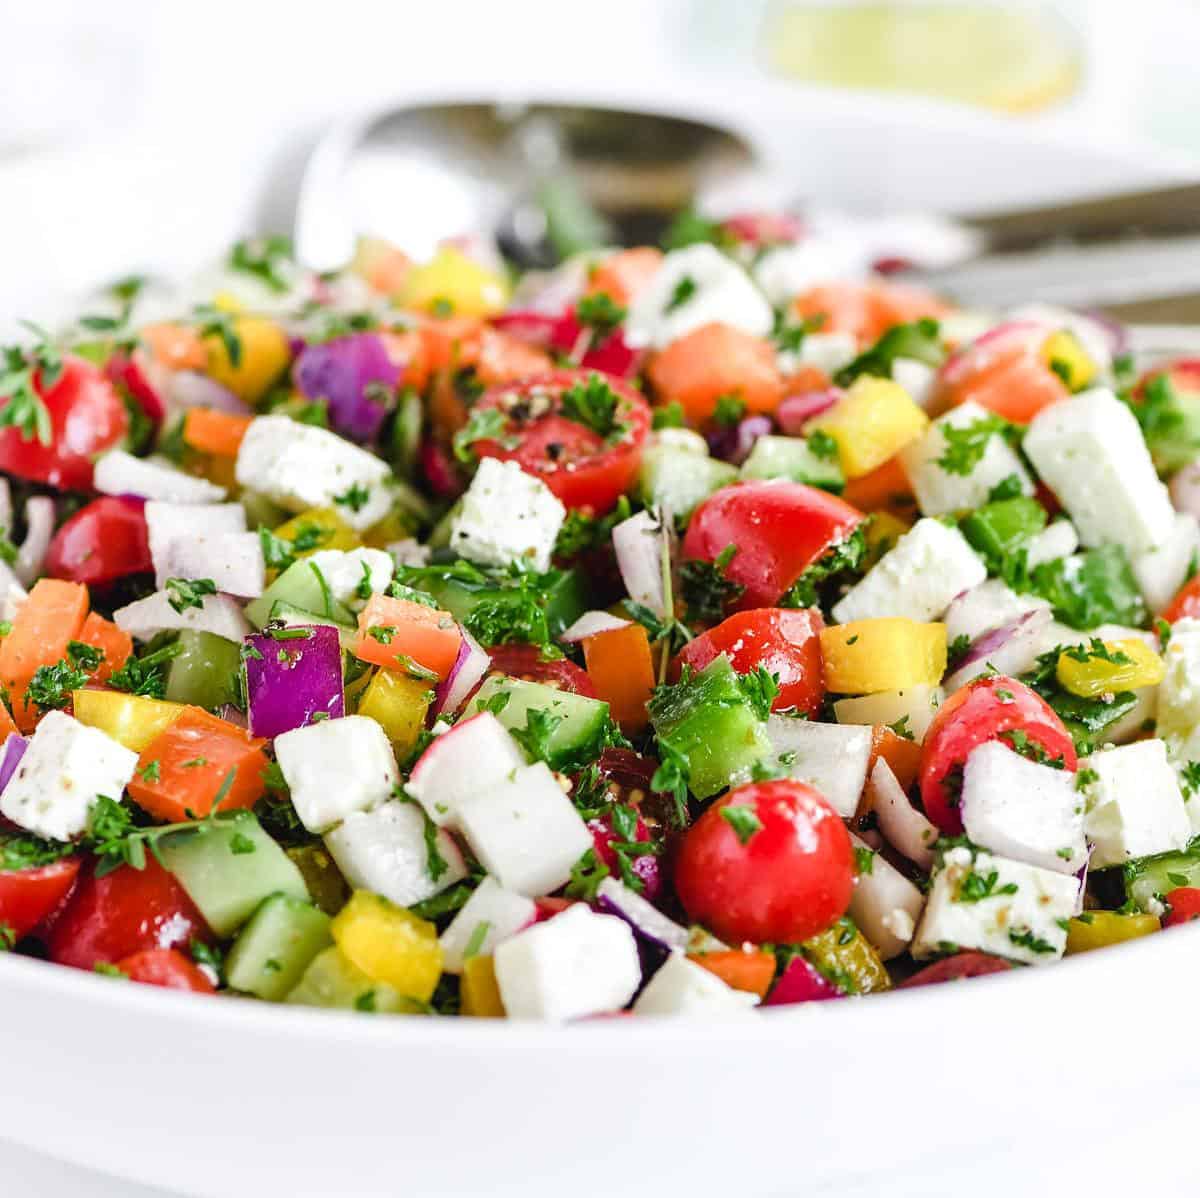  This salad is a feast for the eyes and the tastebuds.